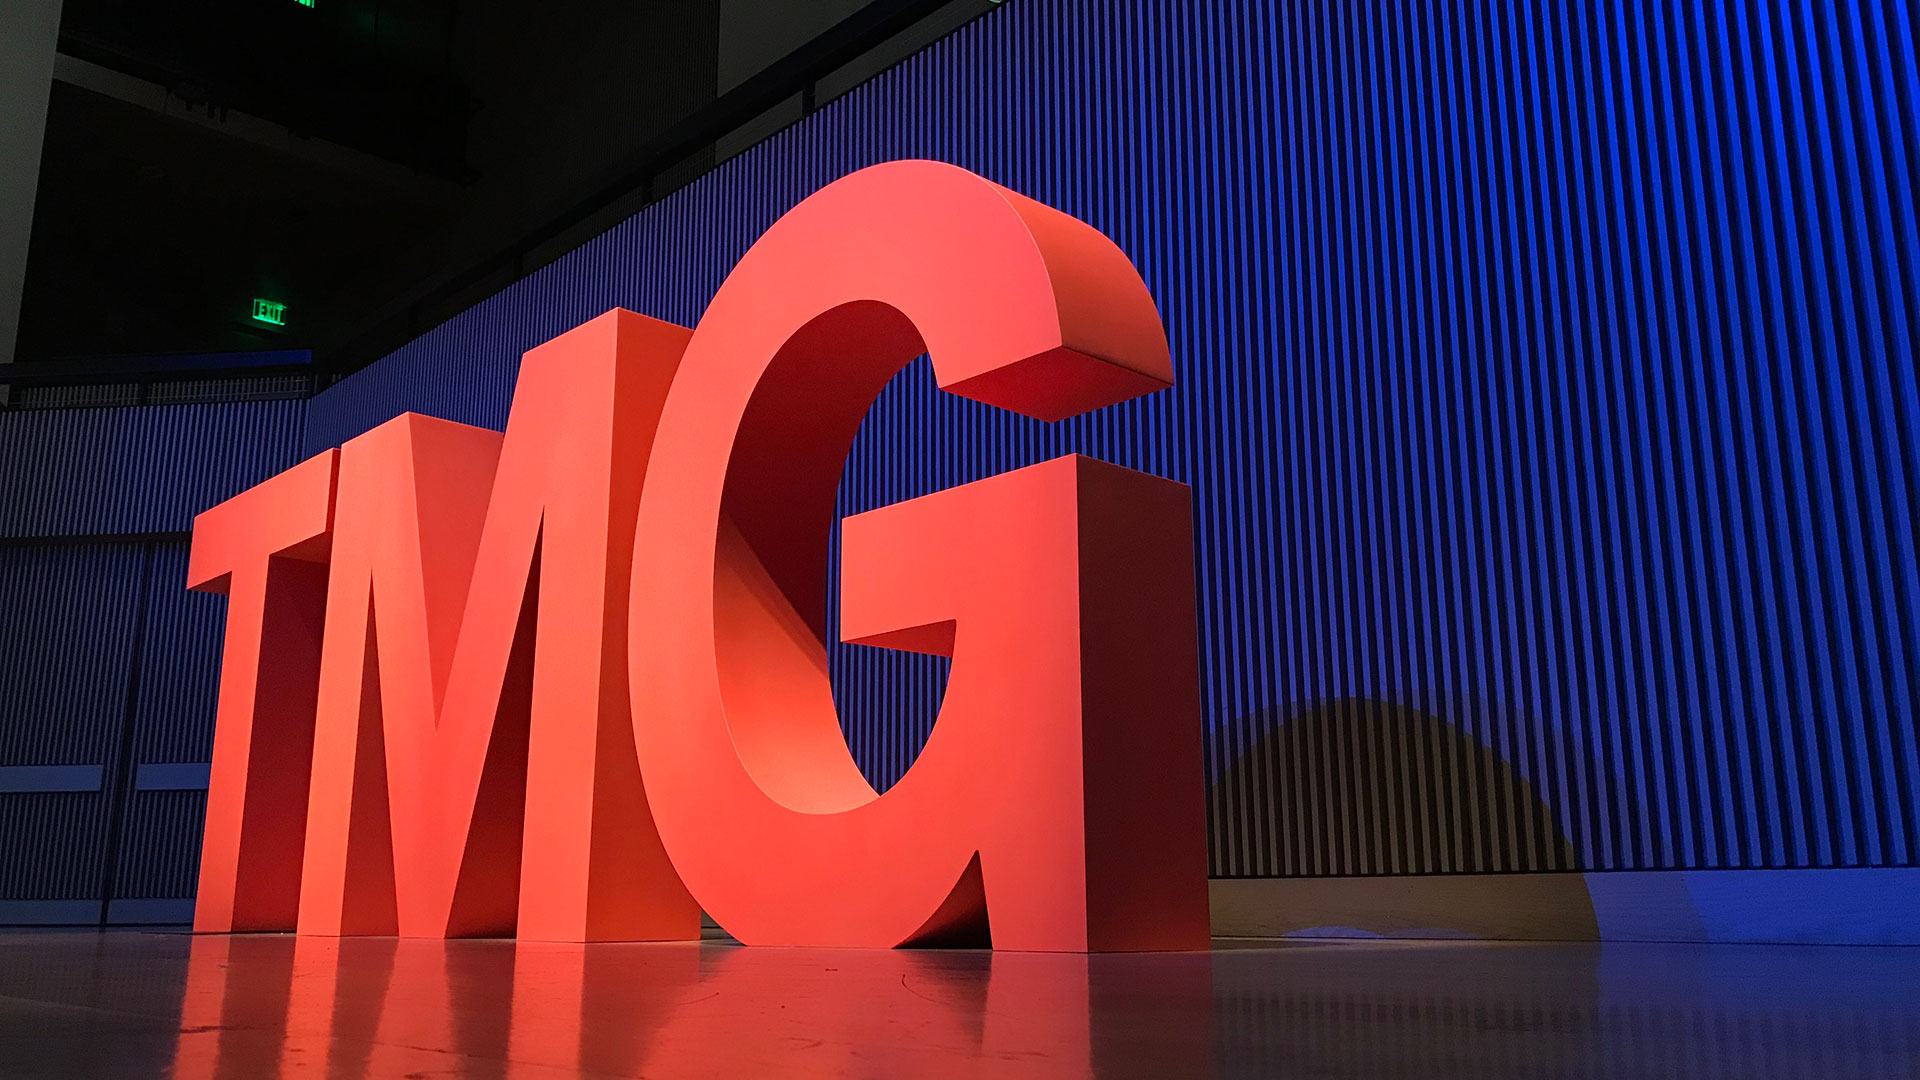 5 foot-tall wooden letters 'TMG' painted bright red on stage with blue light background.